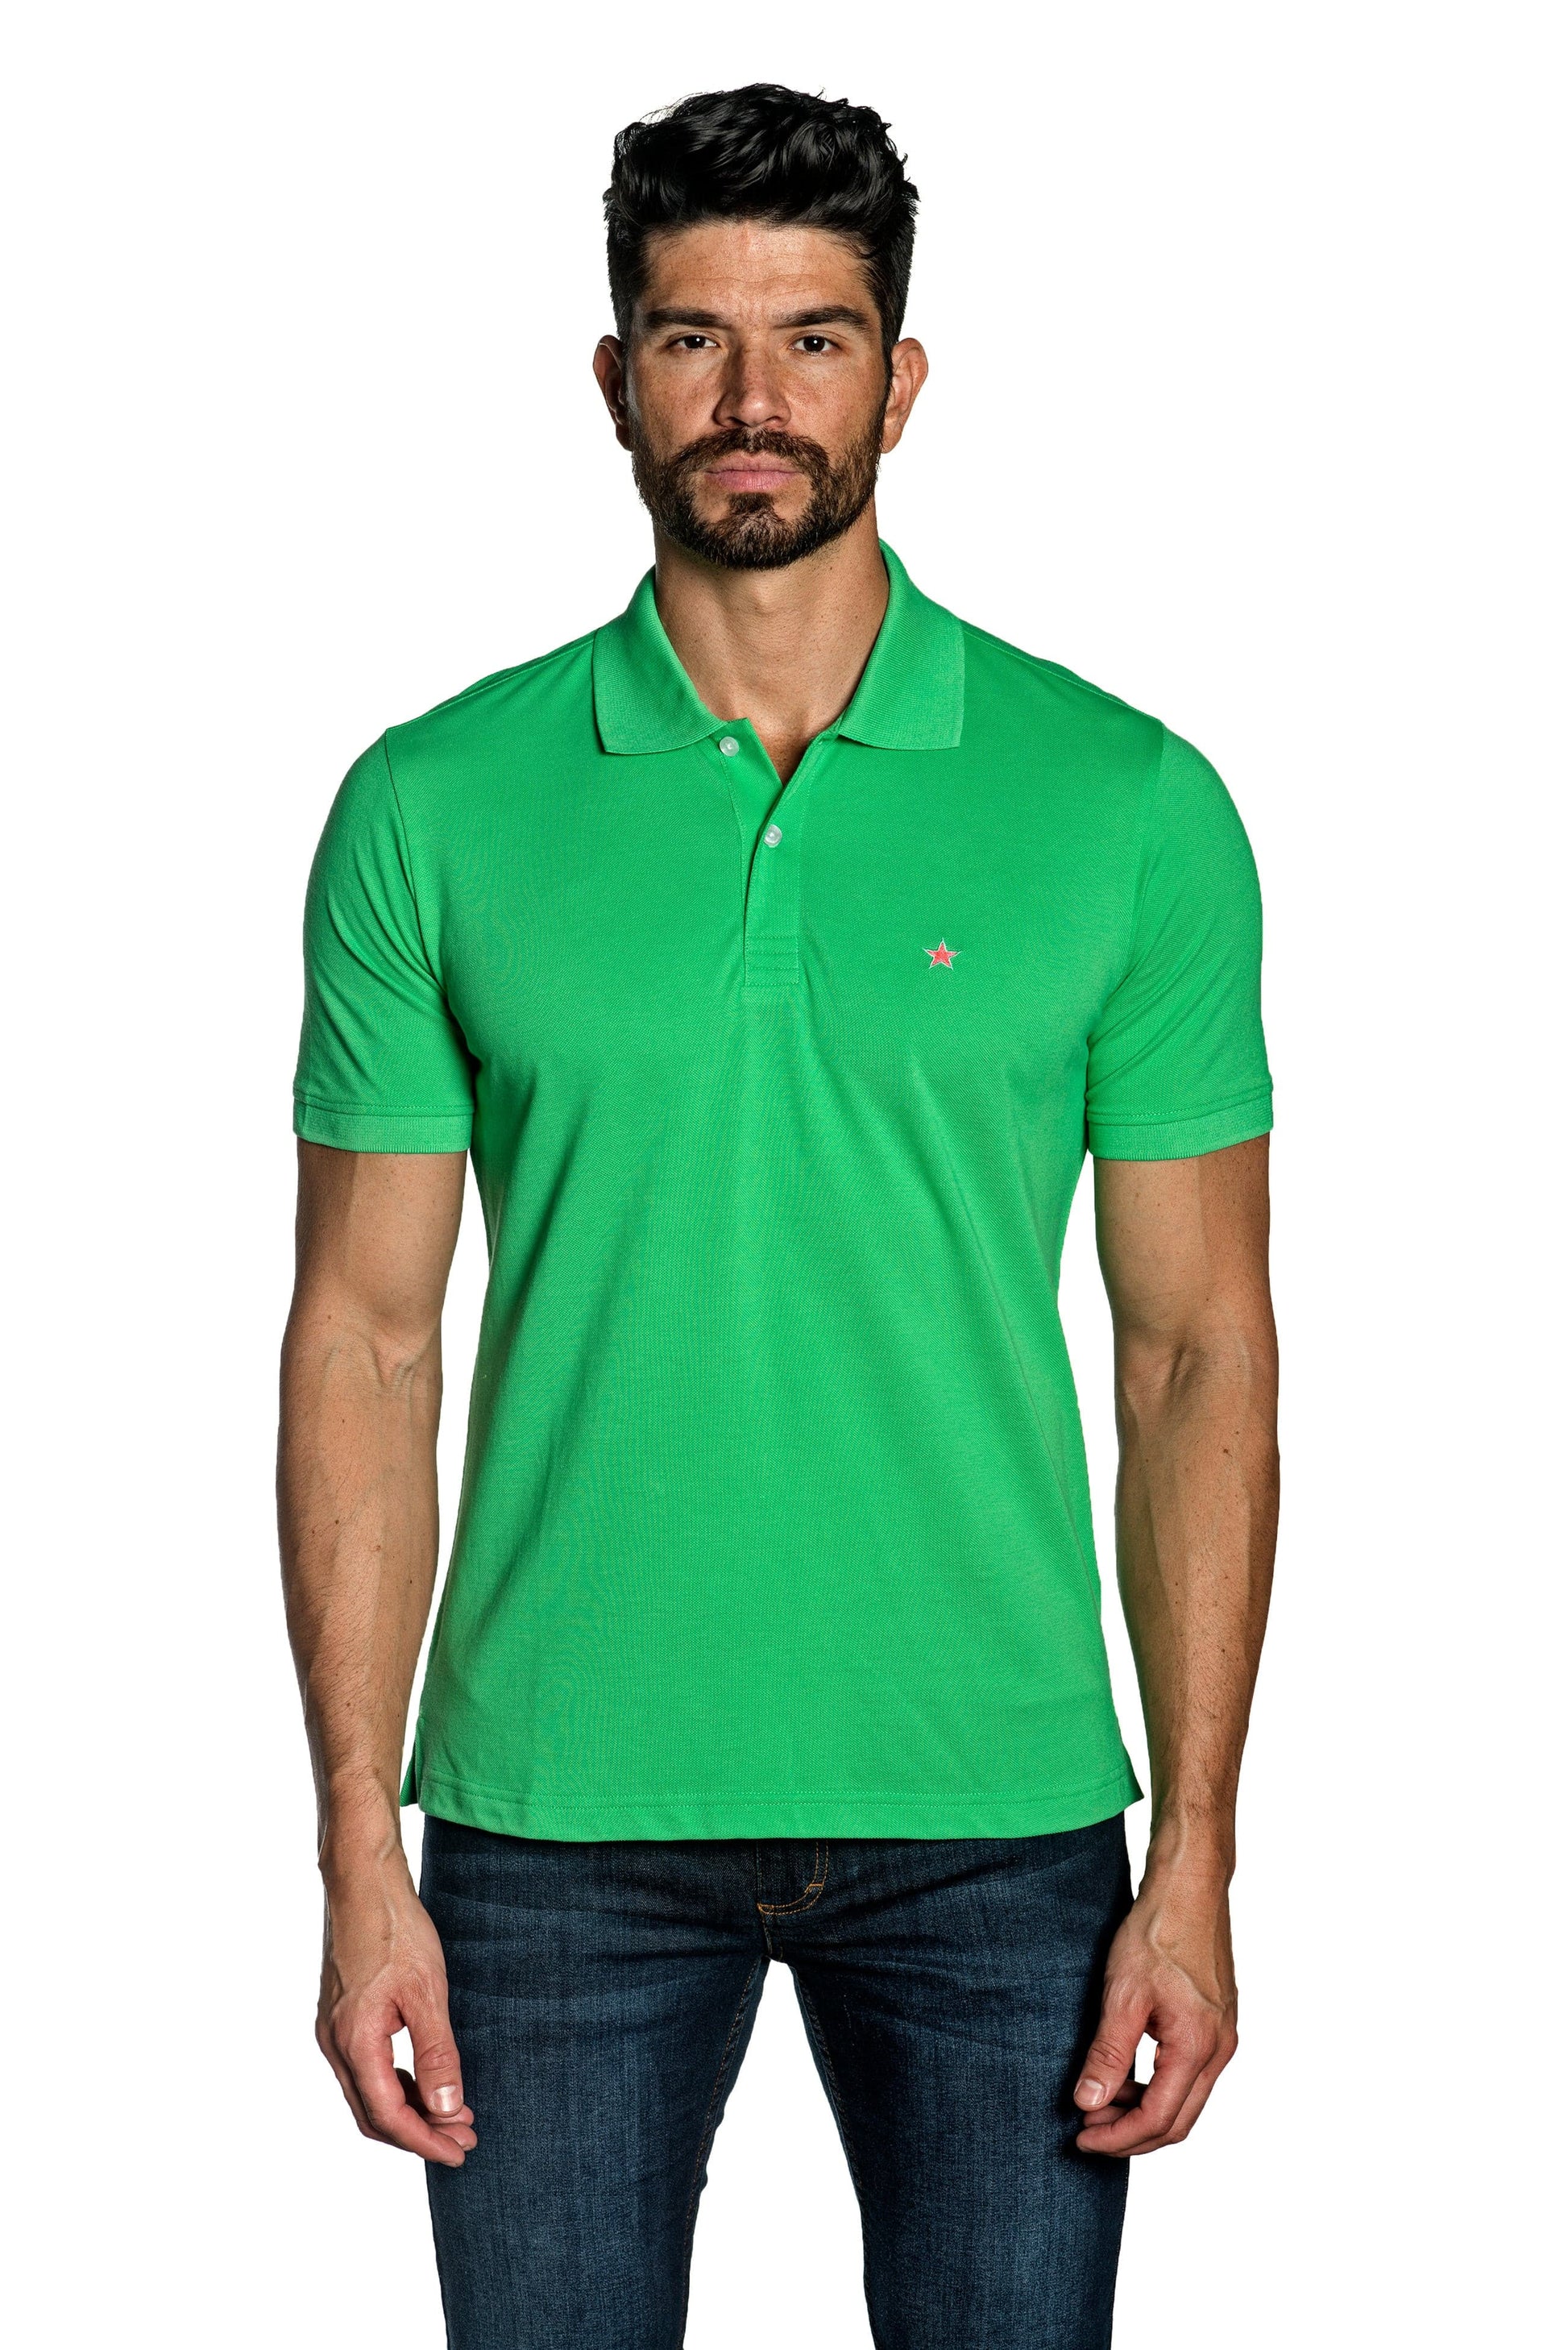 Green Mens Polo With Star Embroidery P-23.